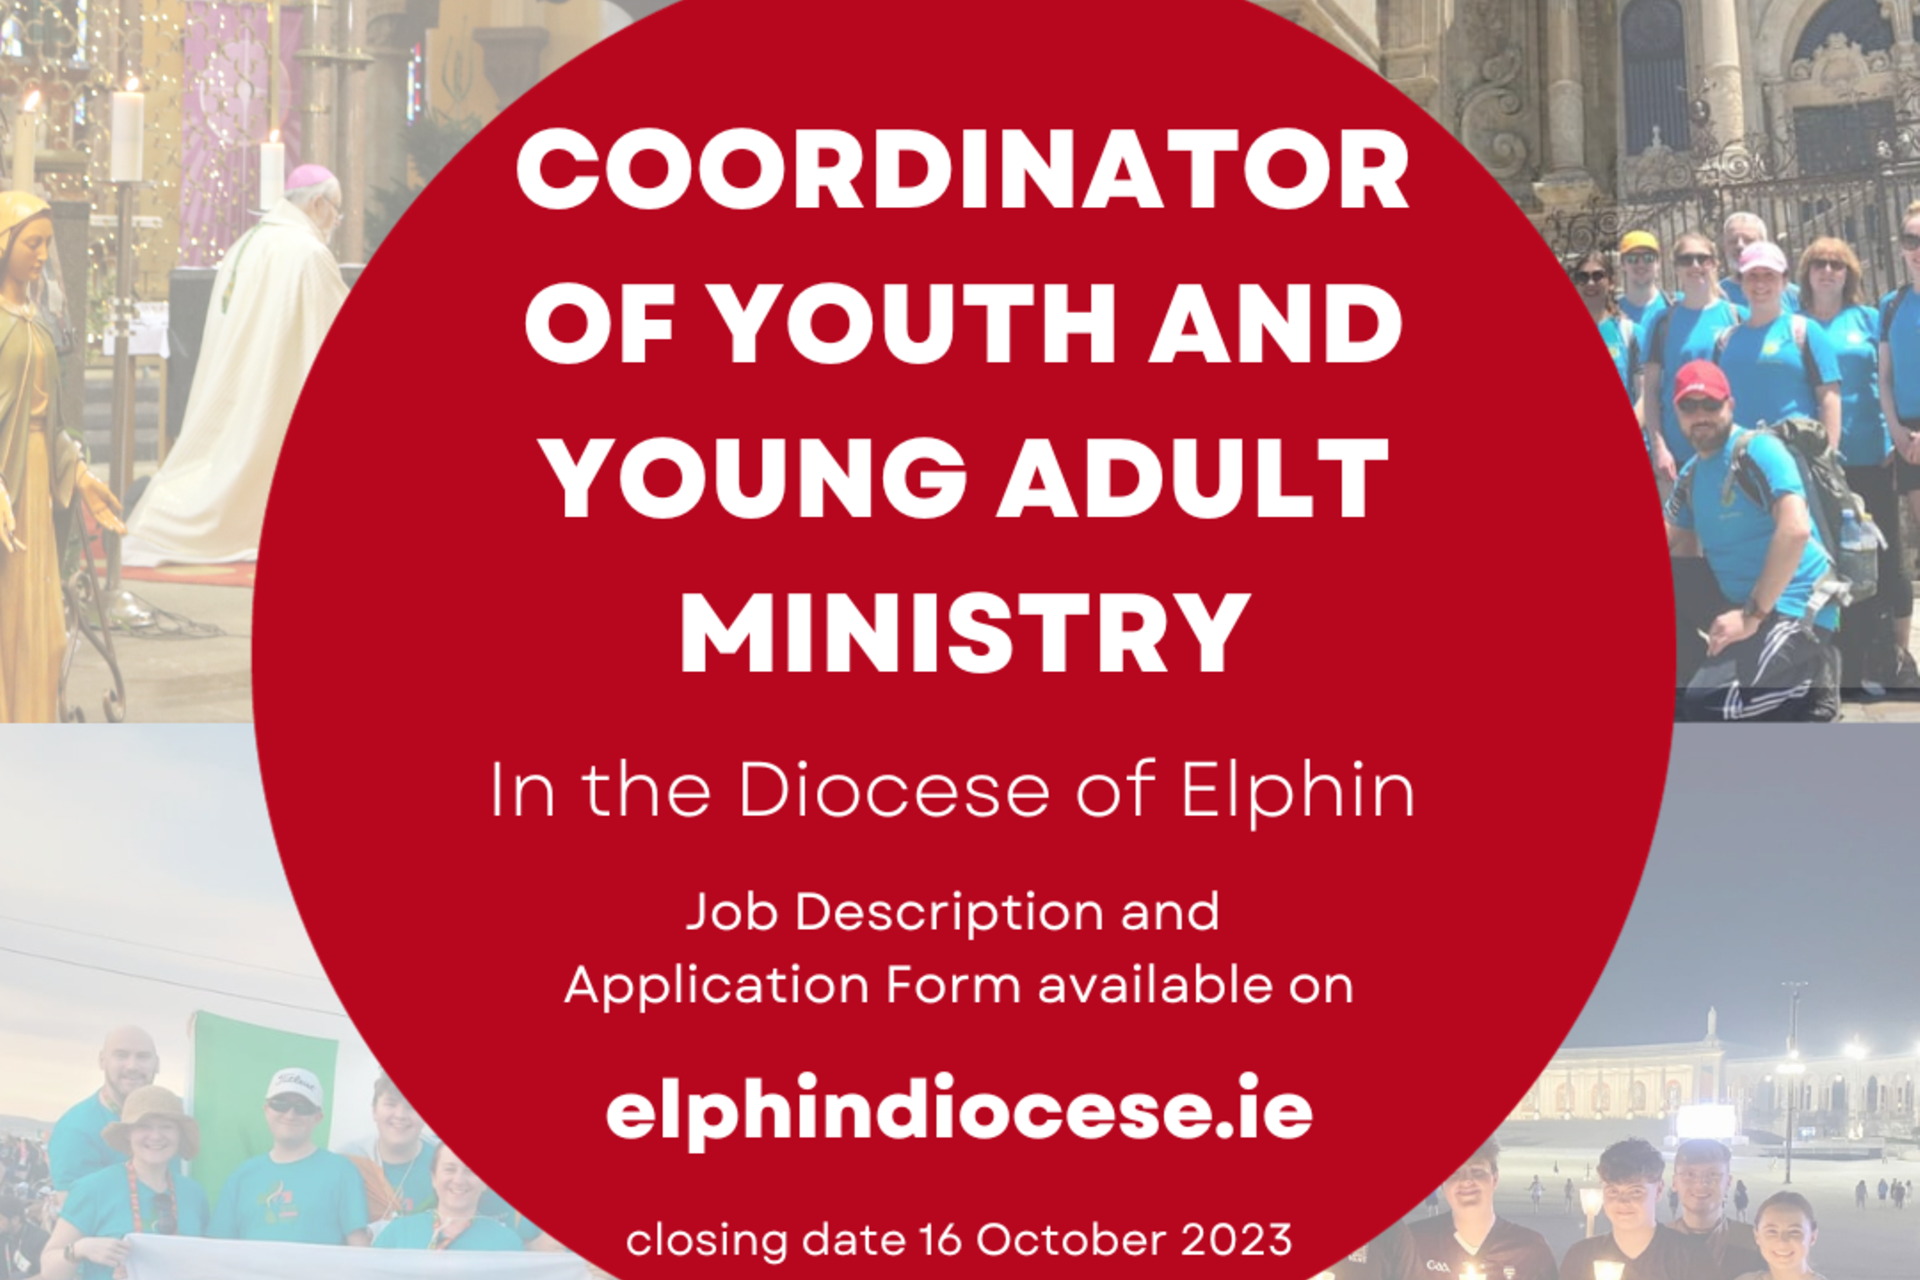 Diocese of Elphin is recruiting for a Coordinator of Youth and Young Adult Ministry